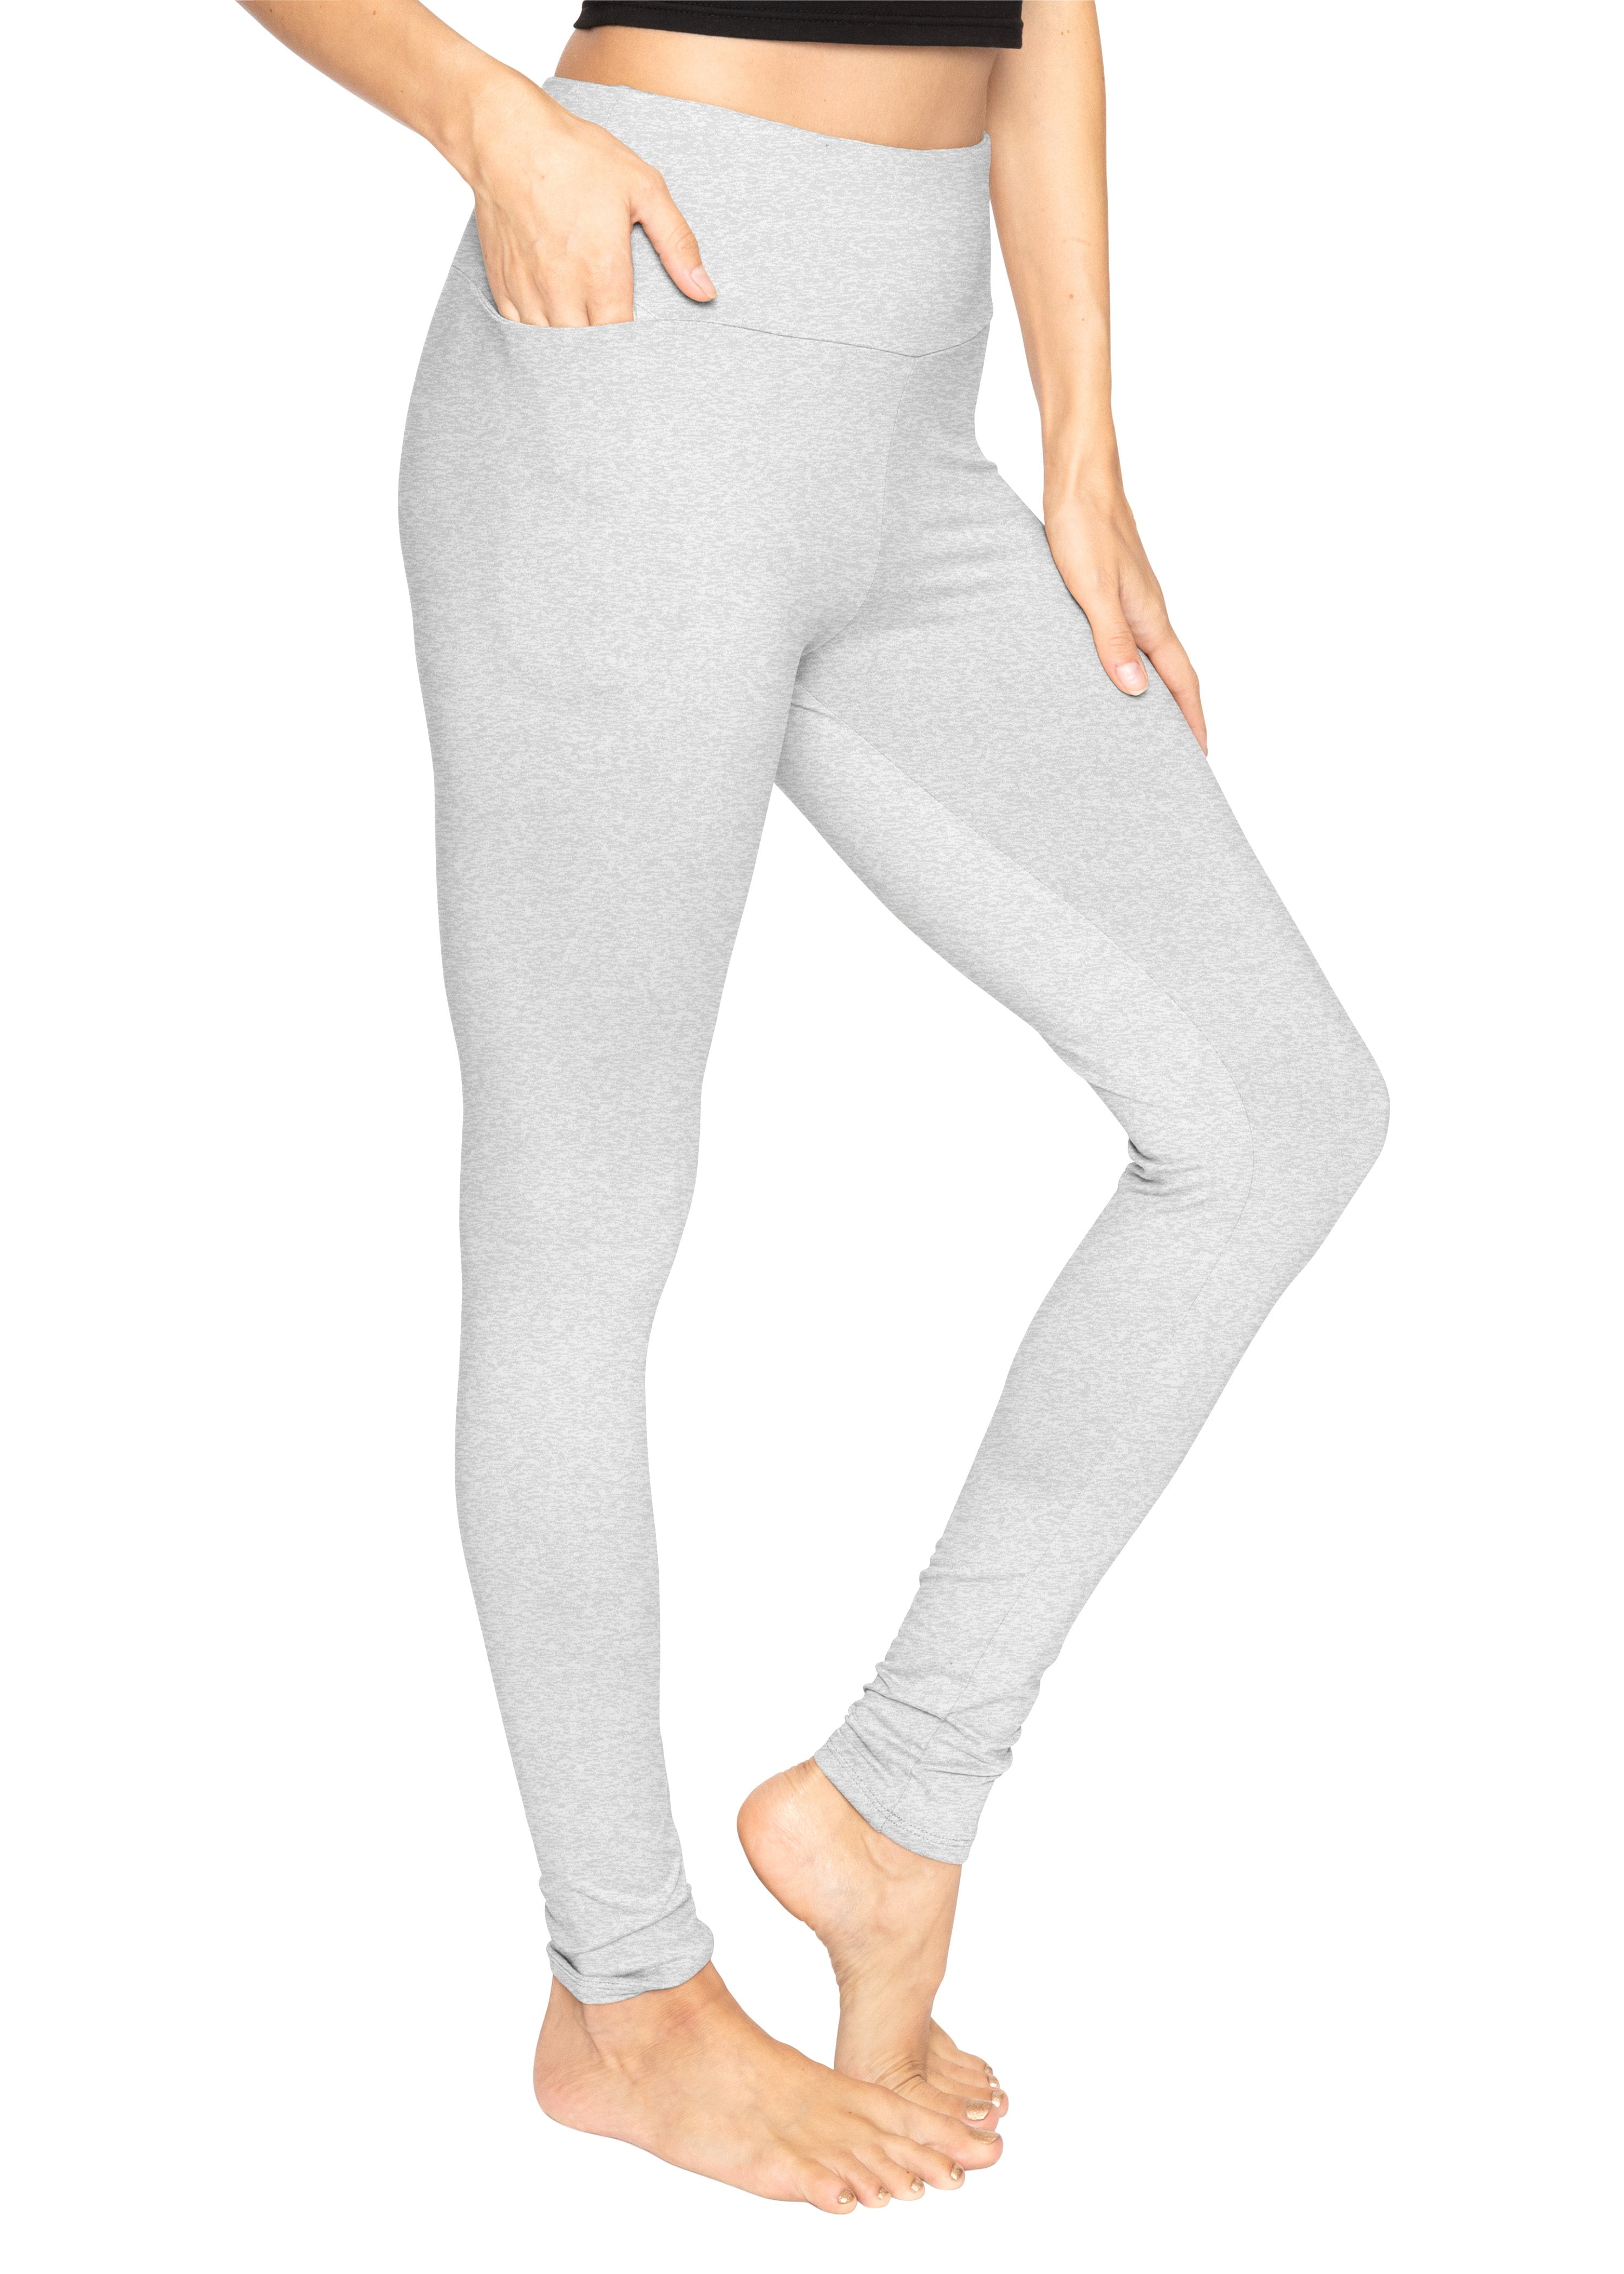 Stretch Is Comfort Women's High Waist Oh so Soft Full Length Leggings with  Pocket |Adult Xlarge-5x